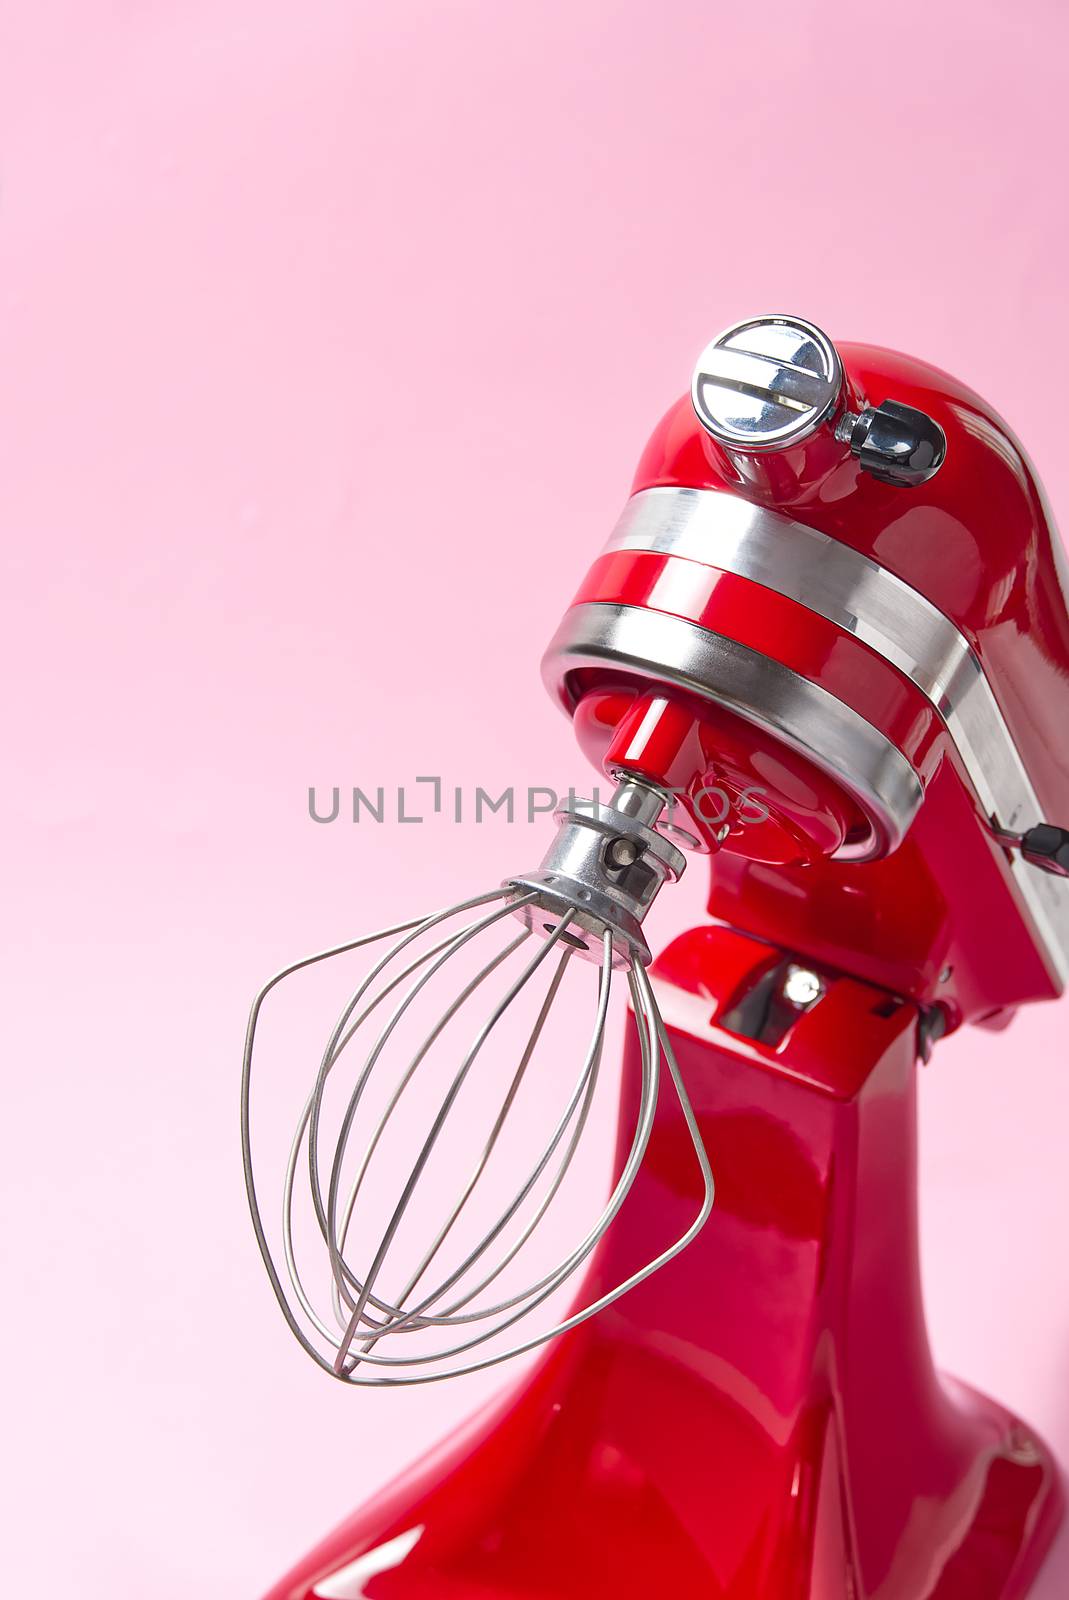 Red kitchen mixer on a pink background